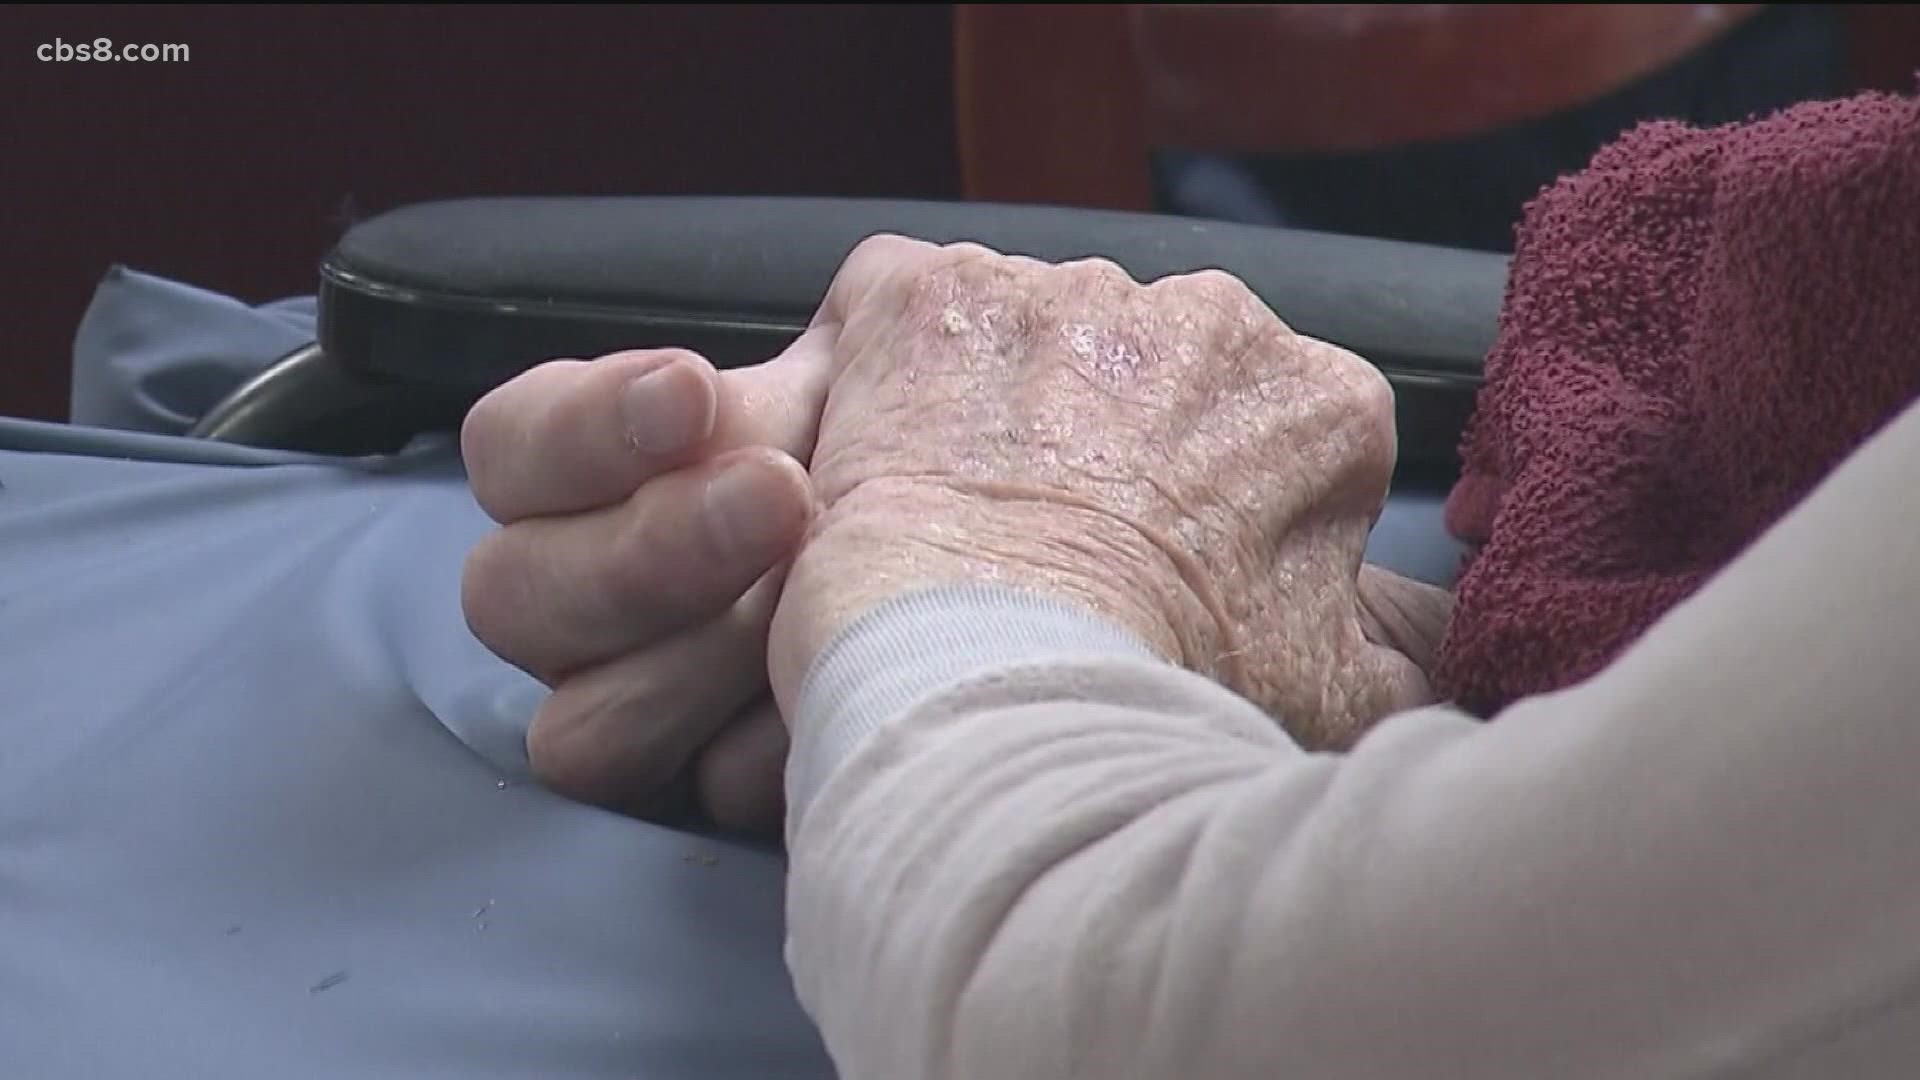 Administrators warn nursing homes may shut down if forced to hire more nurses.